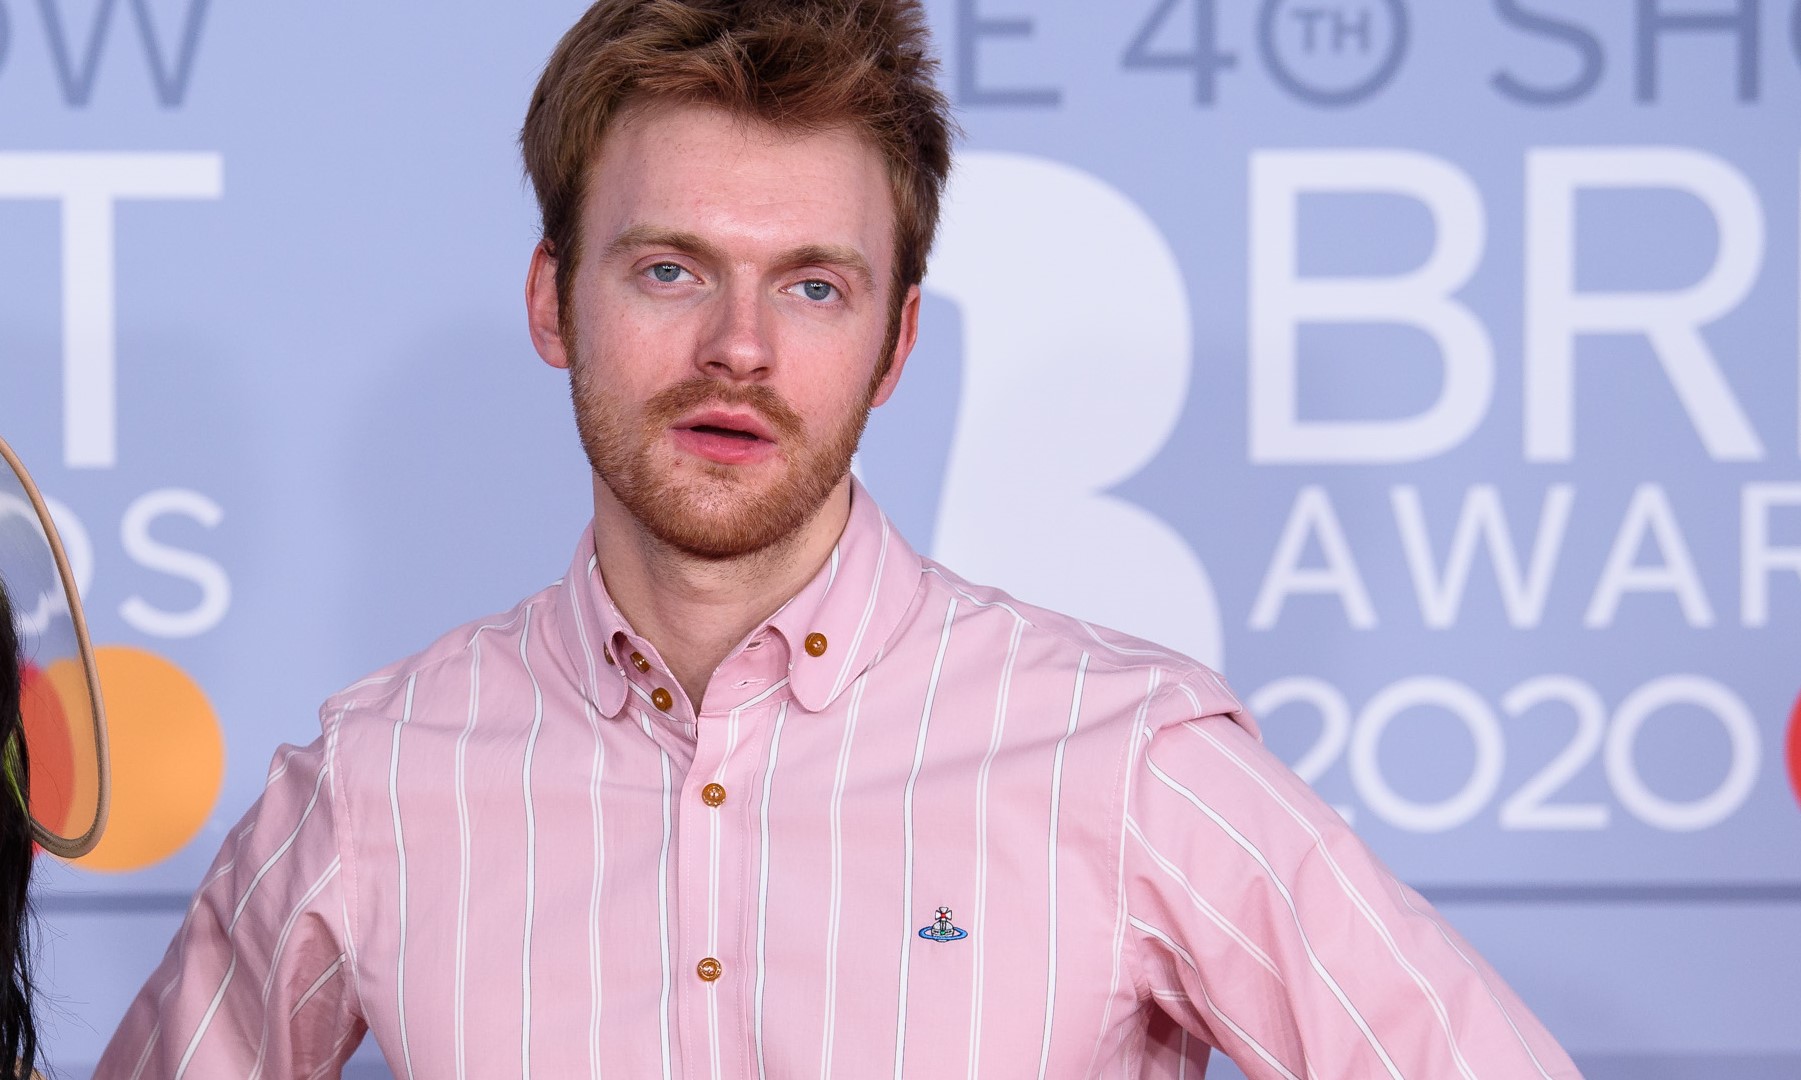 Finneas O'Connell-Age, Movies, Songs, TV Shows, Wife, Kids, Height, Net Worth